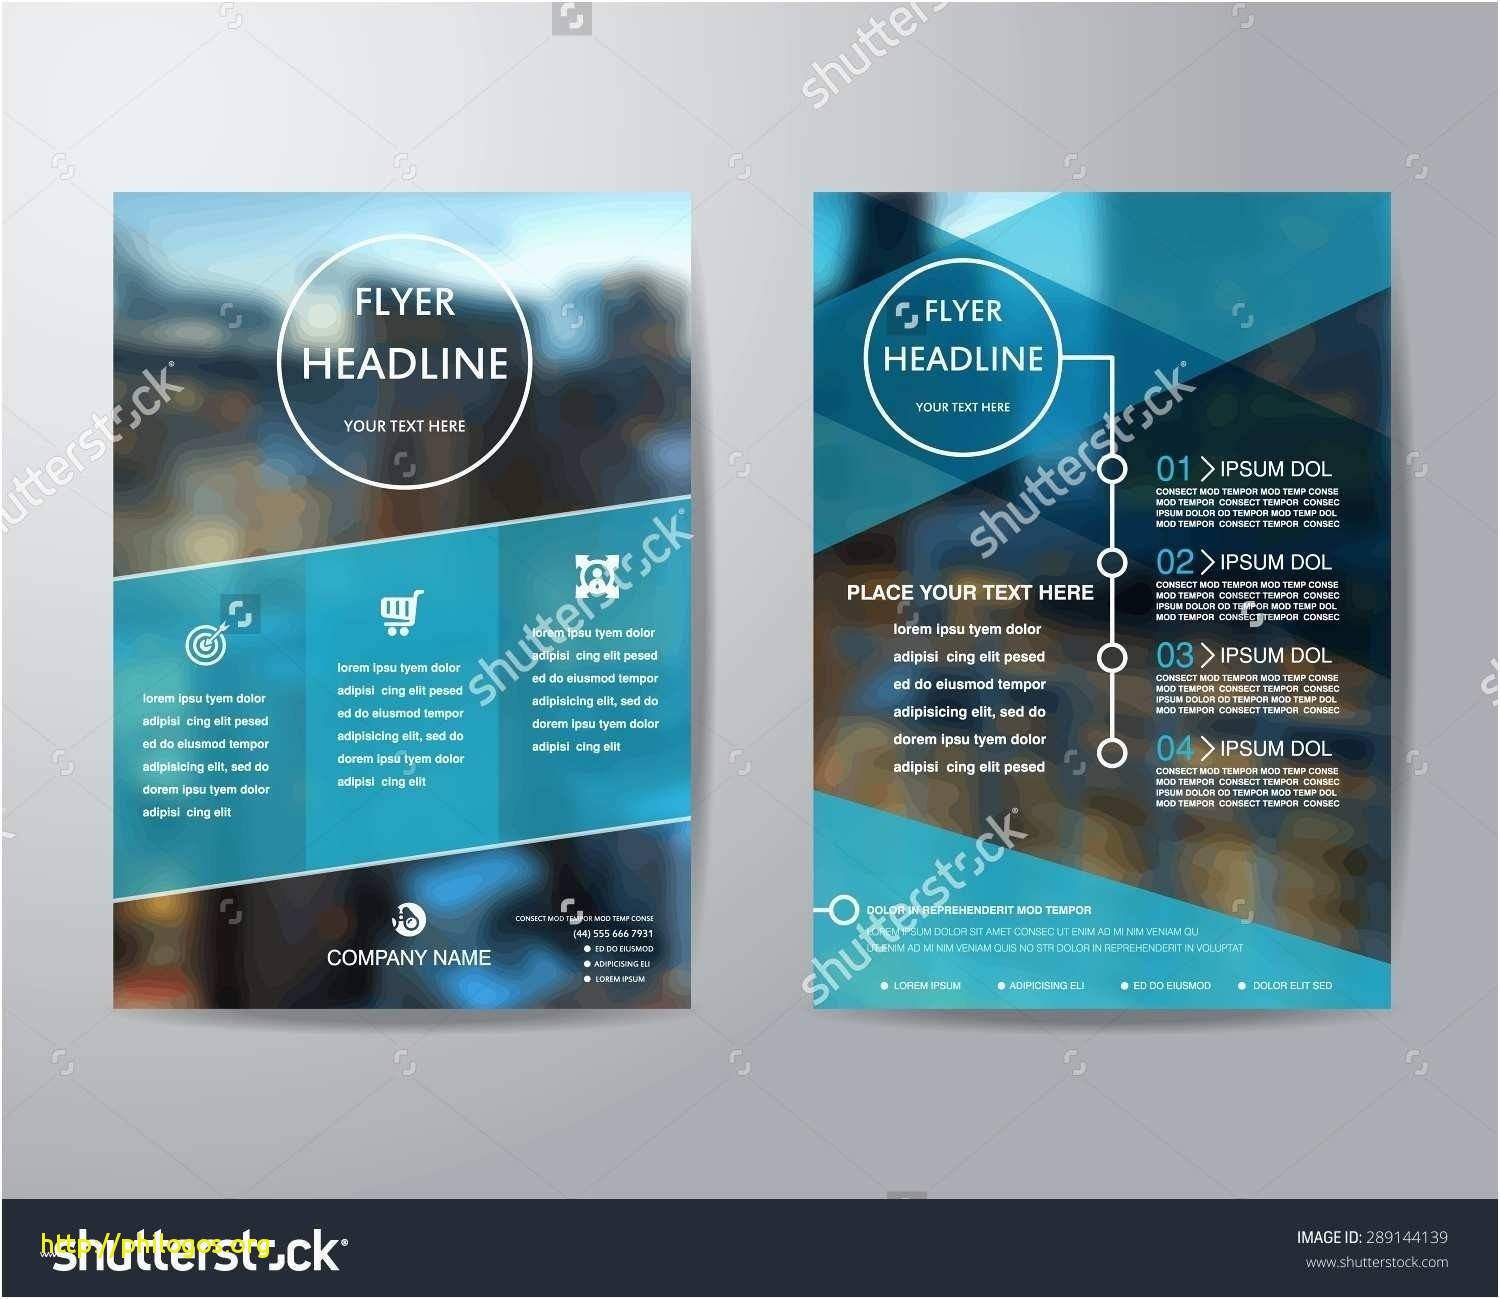 Elegant Free Business Card Psd Template Of Free Psd Business Card Templates Download